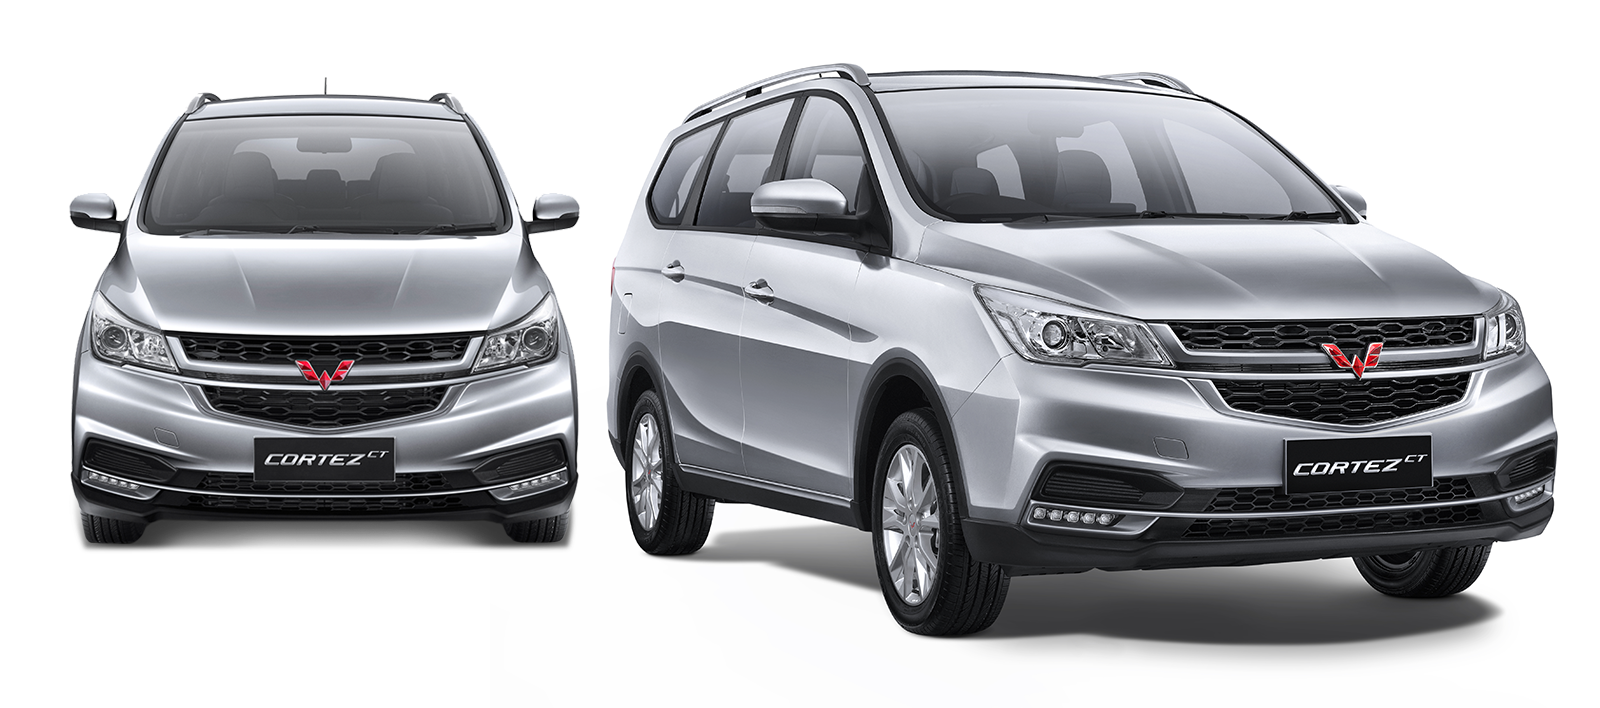 Image The Features and Prices of Wuling Cortez CT Type S